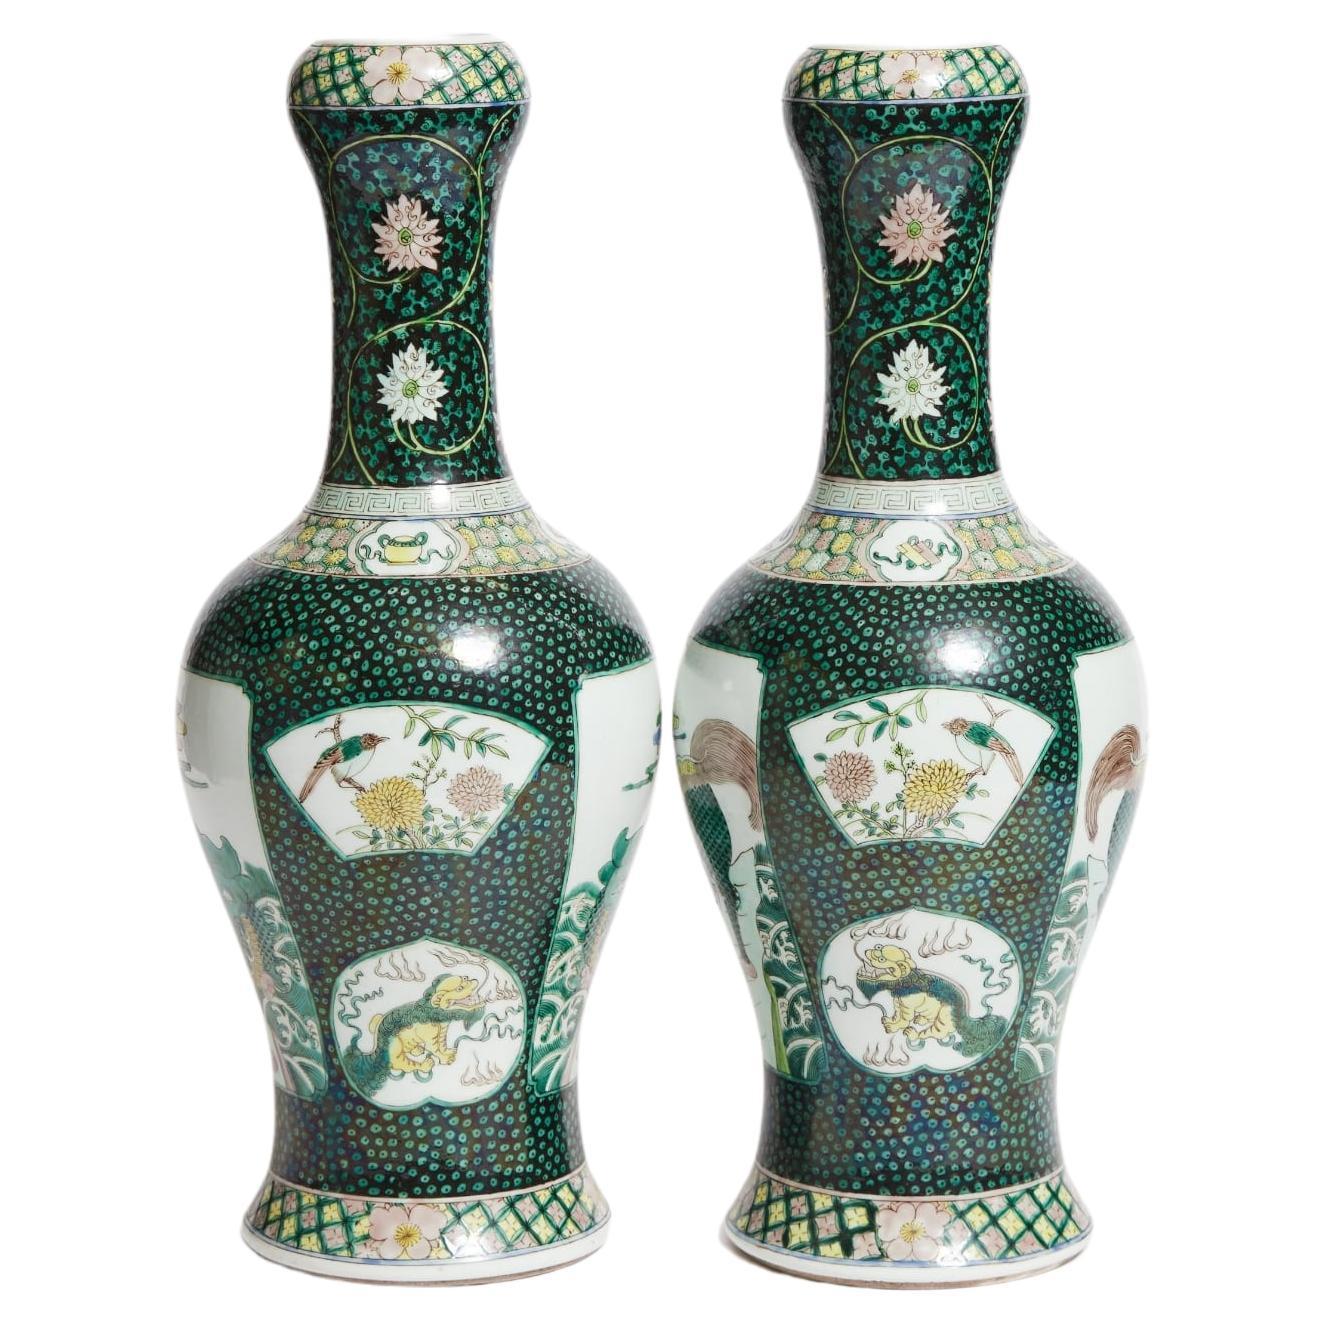 A Pair of Famille Noire Garlic-Mouth Vases, Kangxi Mark, 20th Century
二十世纪 五彩麒麟纹蒜头瓶一对


Incredible pair of Chinese Familie Noire Garlic Mouth Vases. 
'Kangxi Dingmao Nianzhi' marks to bases
height 18.2 inches x 5.5 inches diameter base